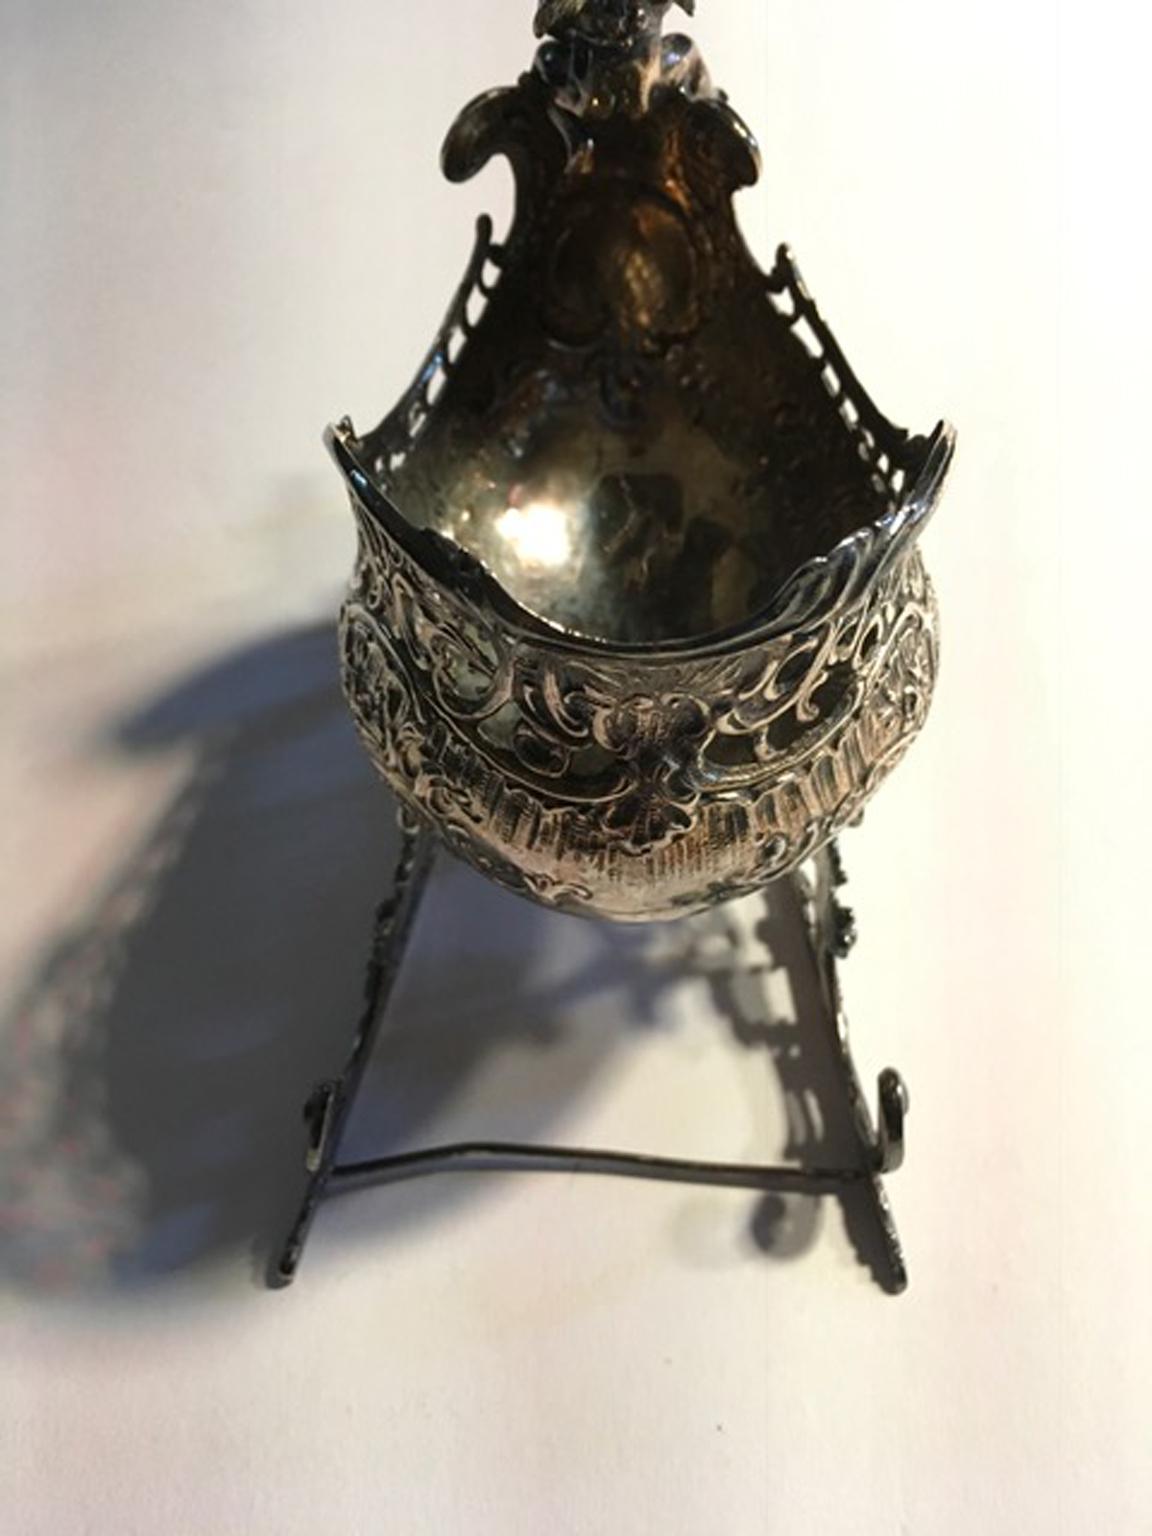 France 1750 circa handcrafted silver sleed bowl with little love in Victorian style

This magnificent piece of silver jewel art, in Victorian style, is an example of high level of the antique Orlean artisan where it was made. Fine and elegant